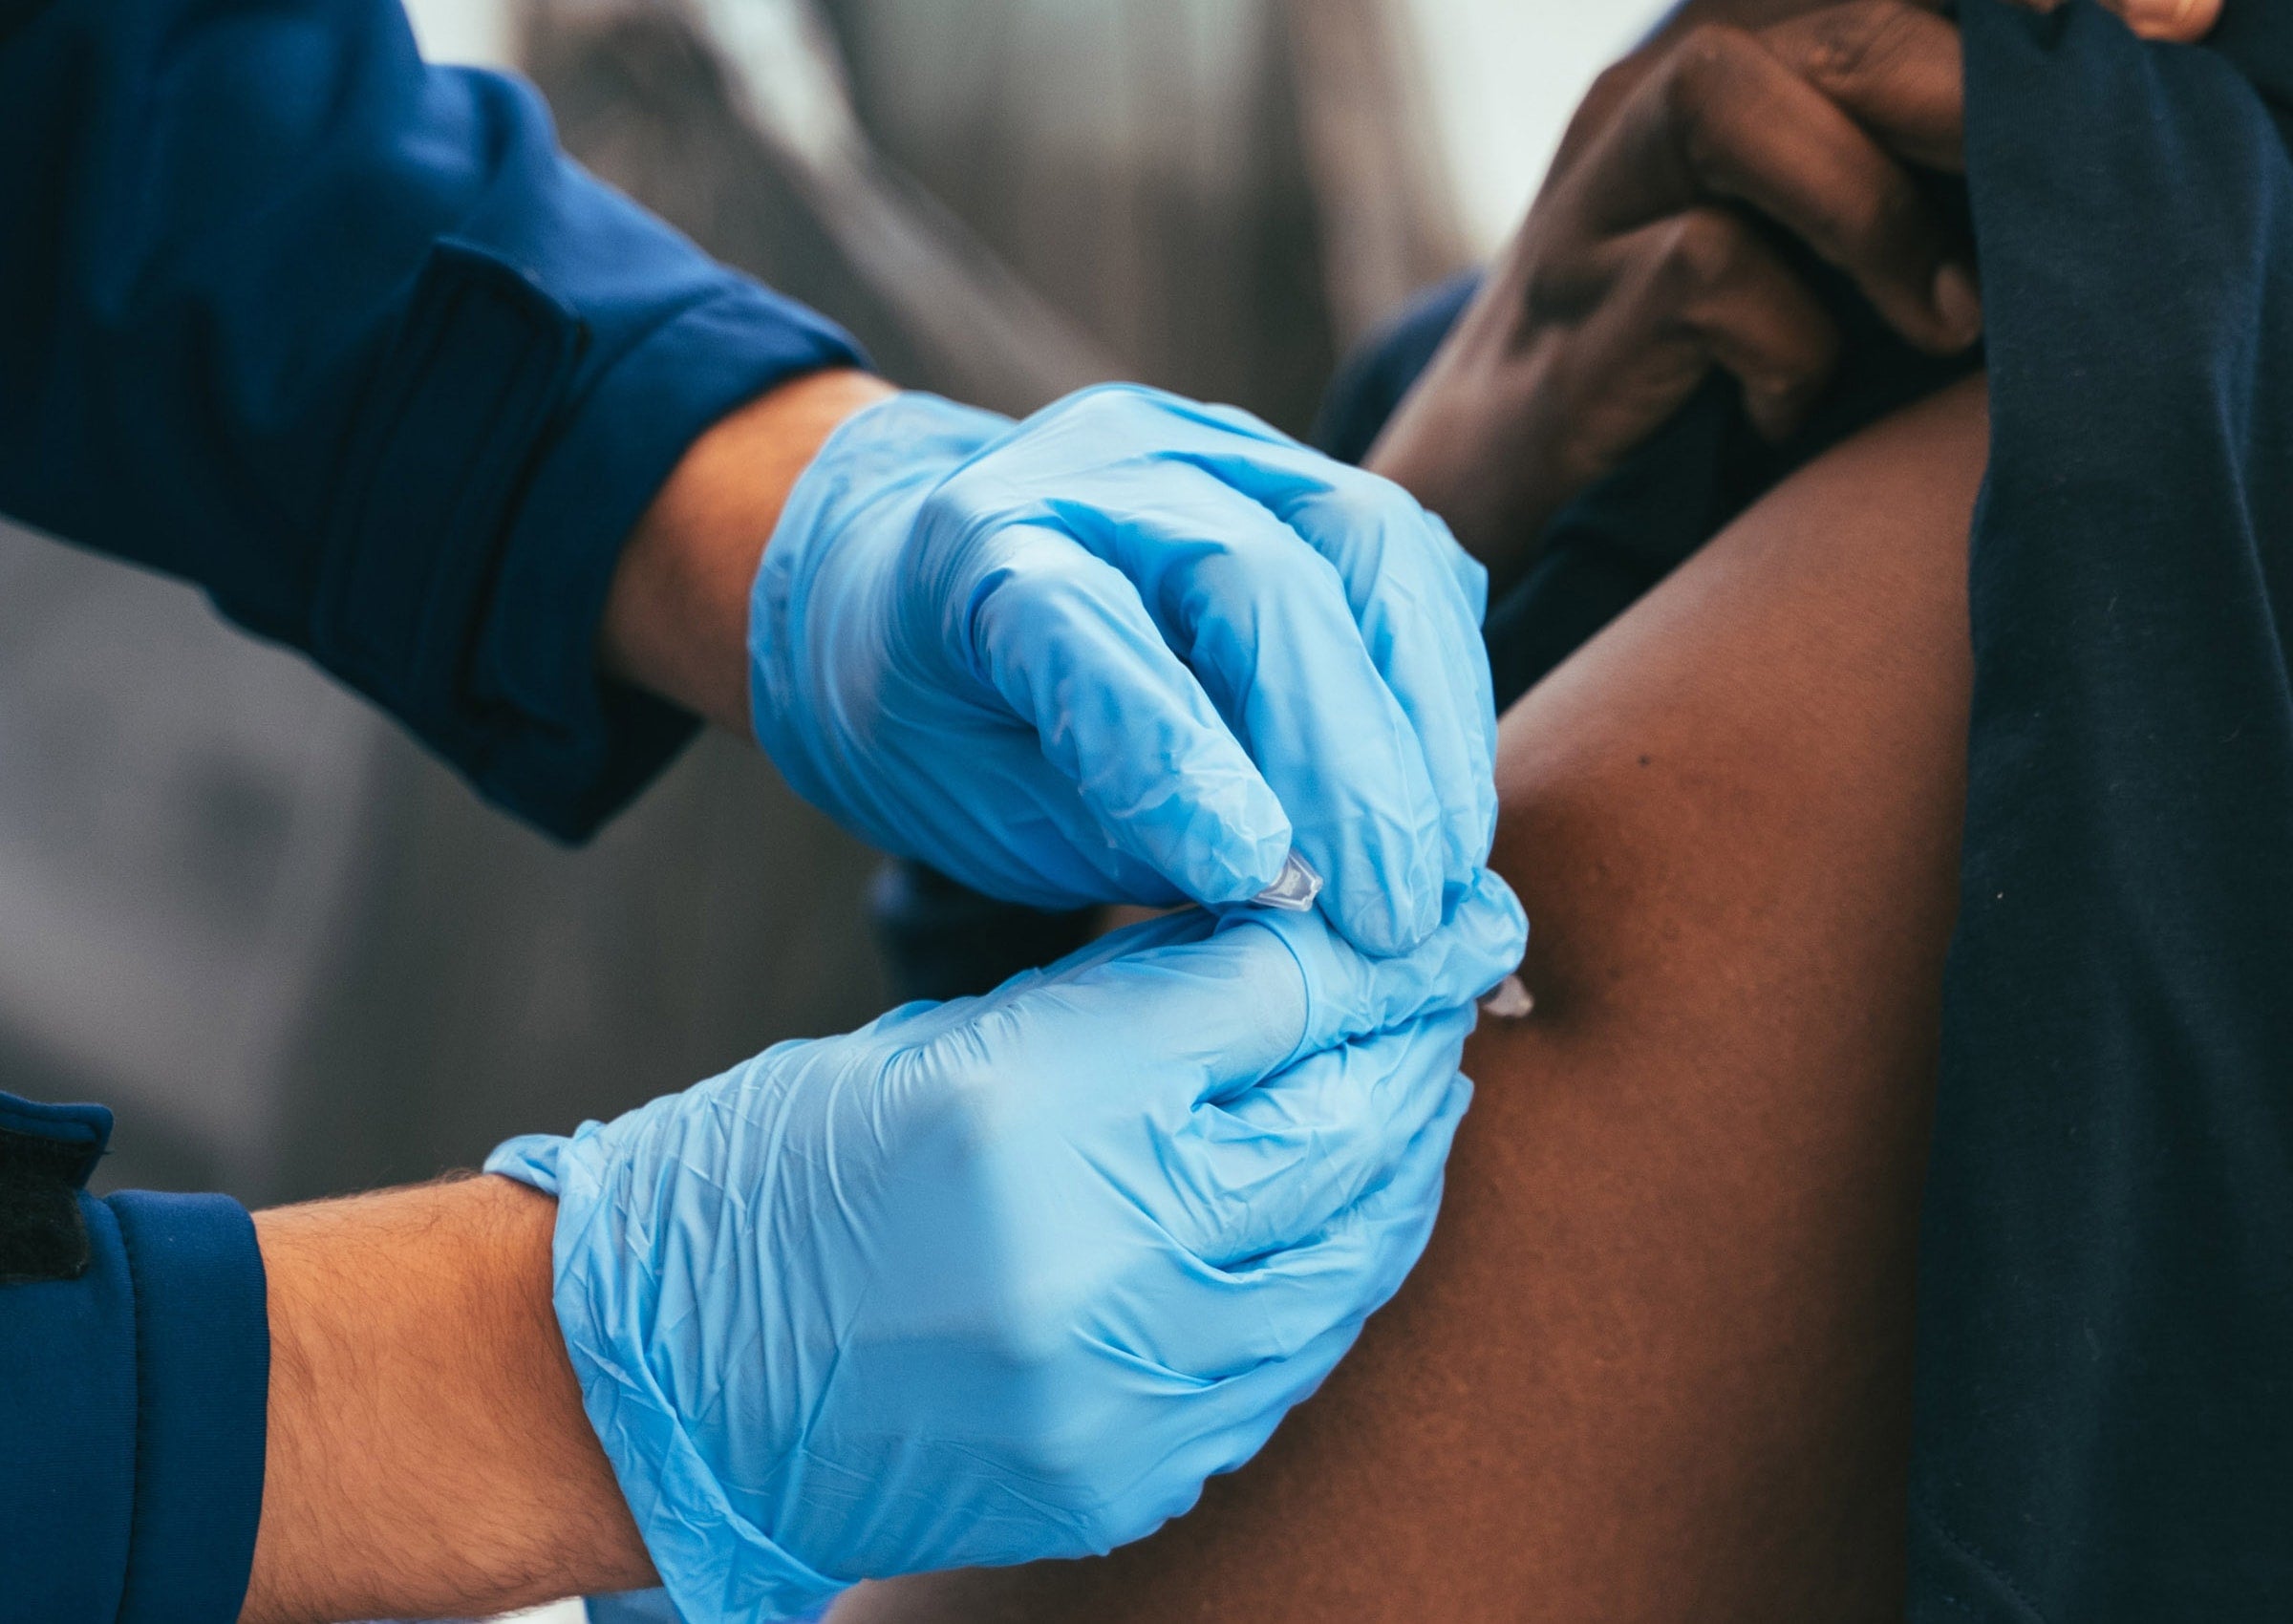 nurse wearing blue medical gloves administers a vaccine to a person in their arm